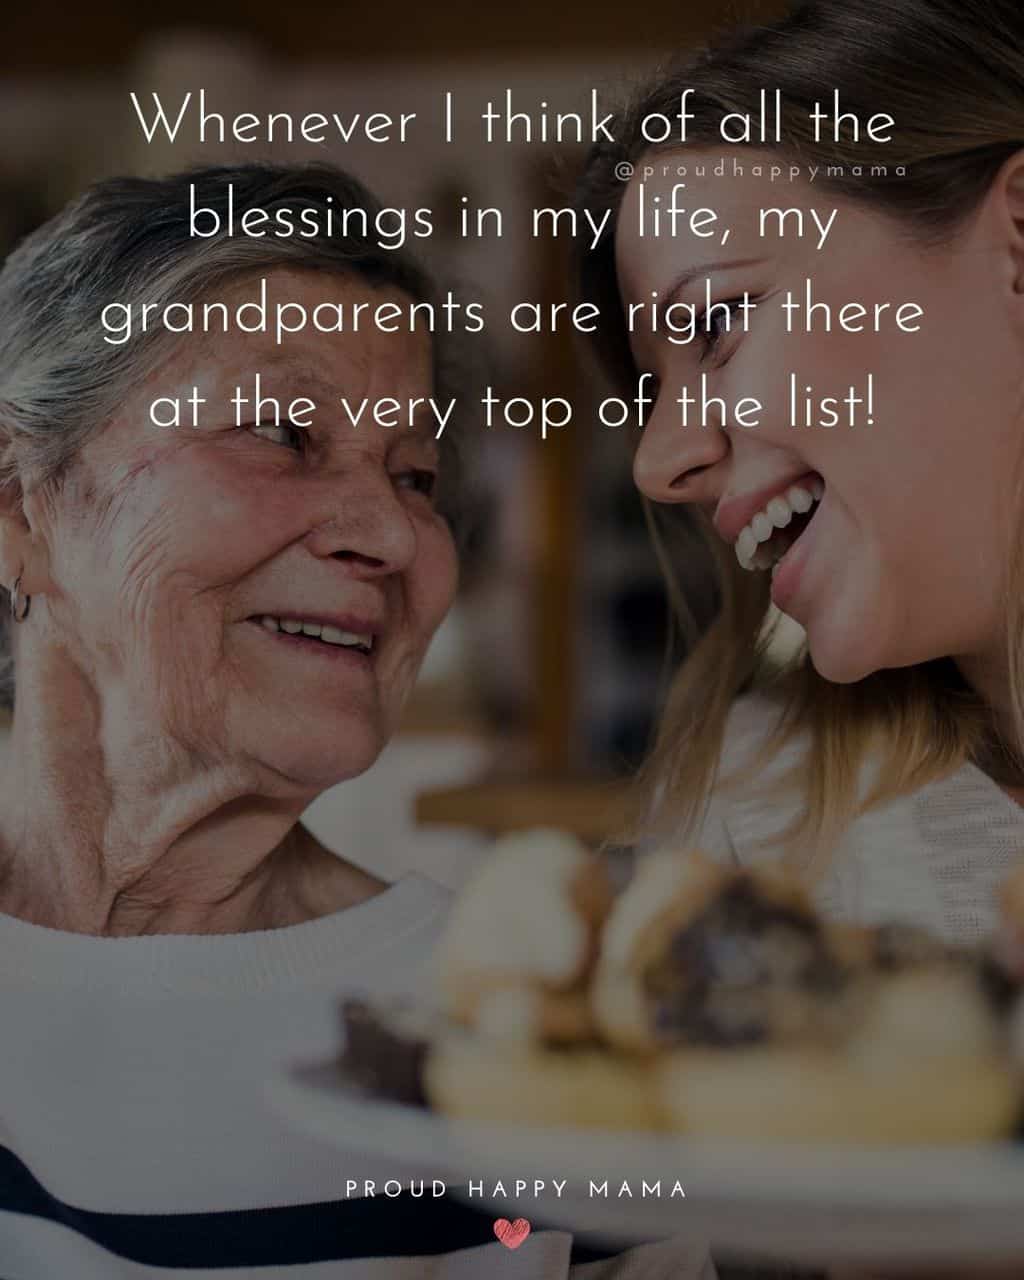 Grandparent Quotes – Whenever I think of all the blessings in my life, my grandparents are right there at the very top of the list!’